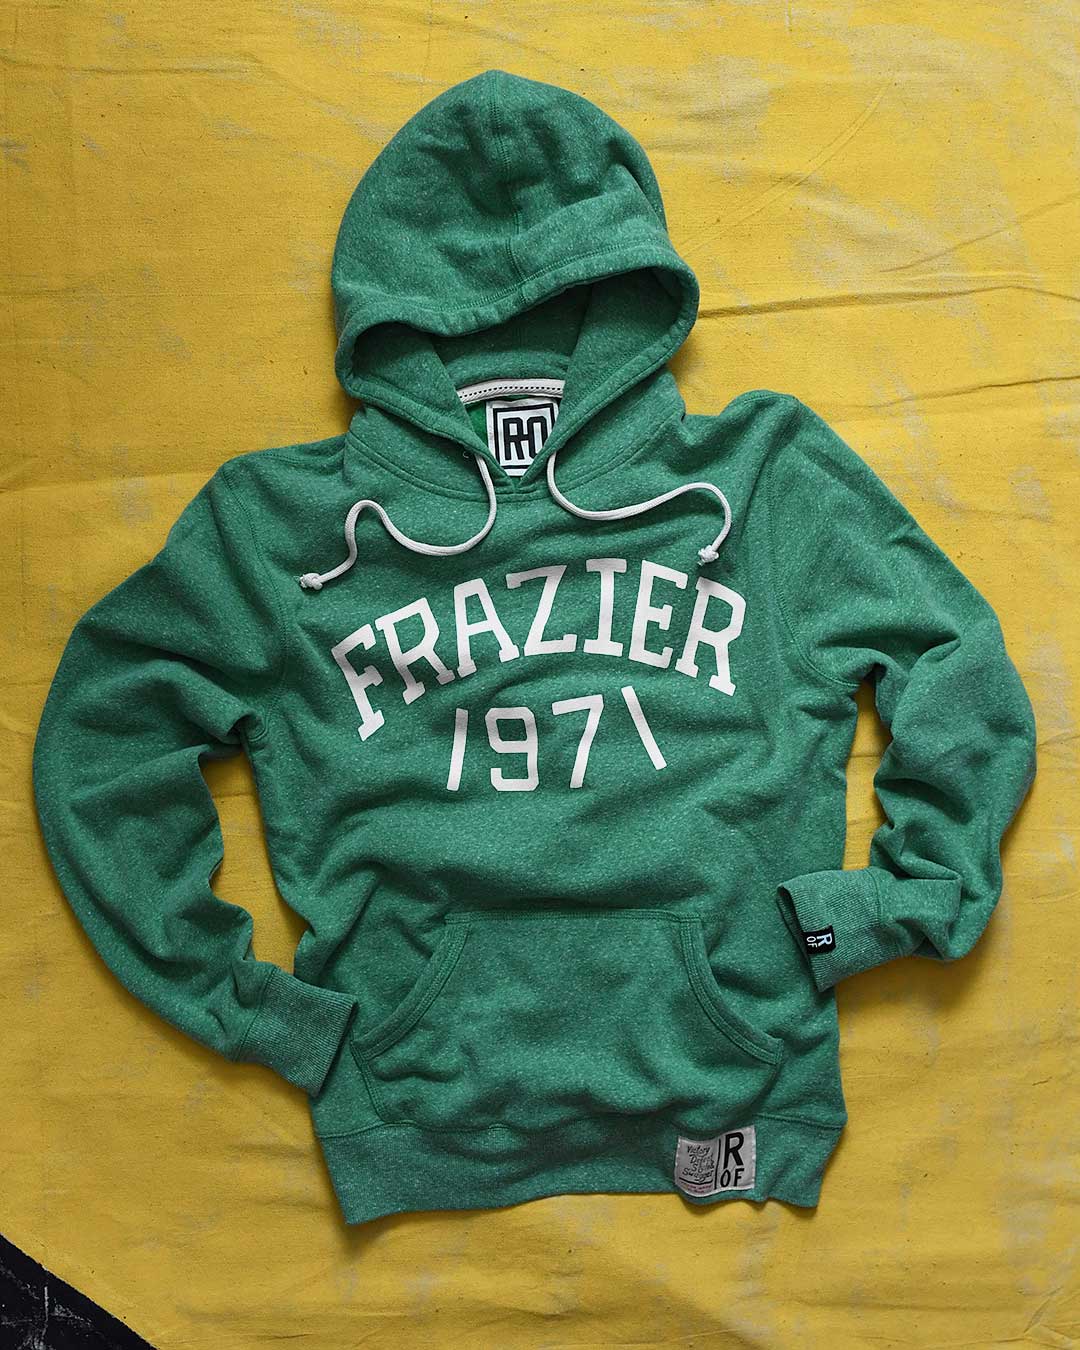 FOTC - Frazier 1971 MSG Green Hoody - Roots of Fight Canada